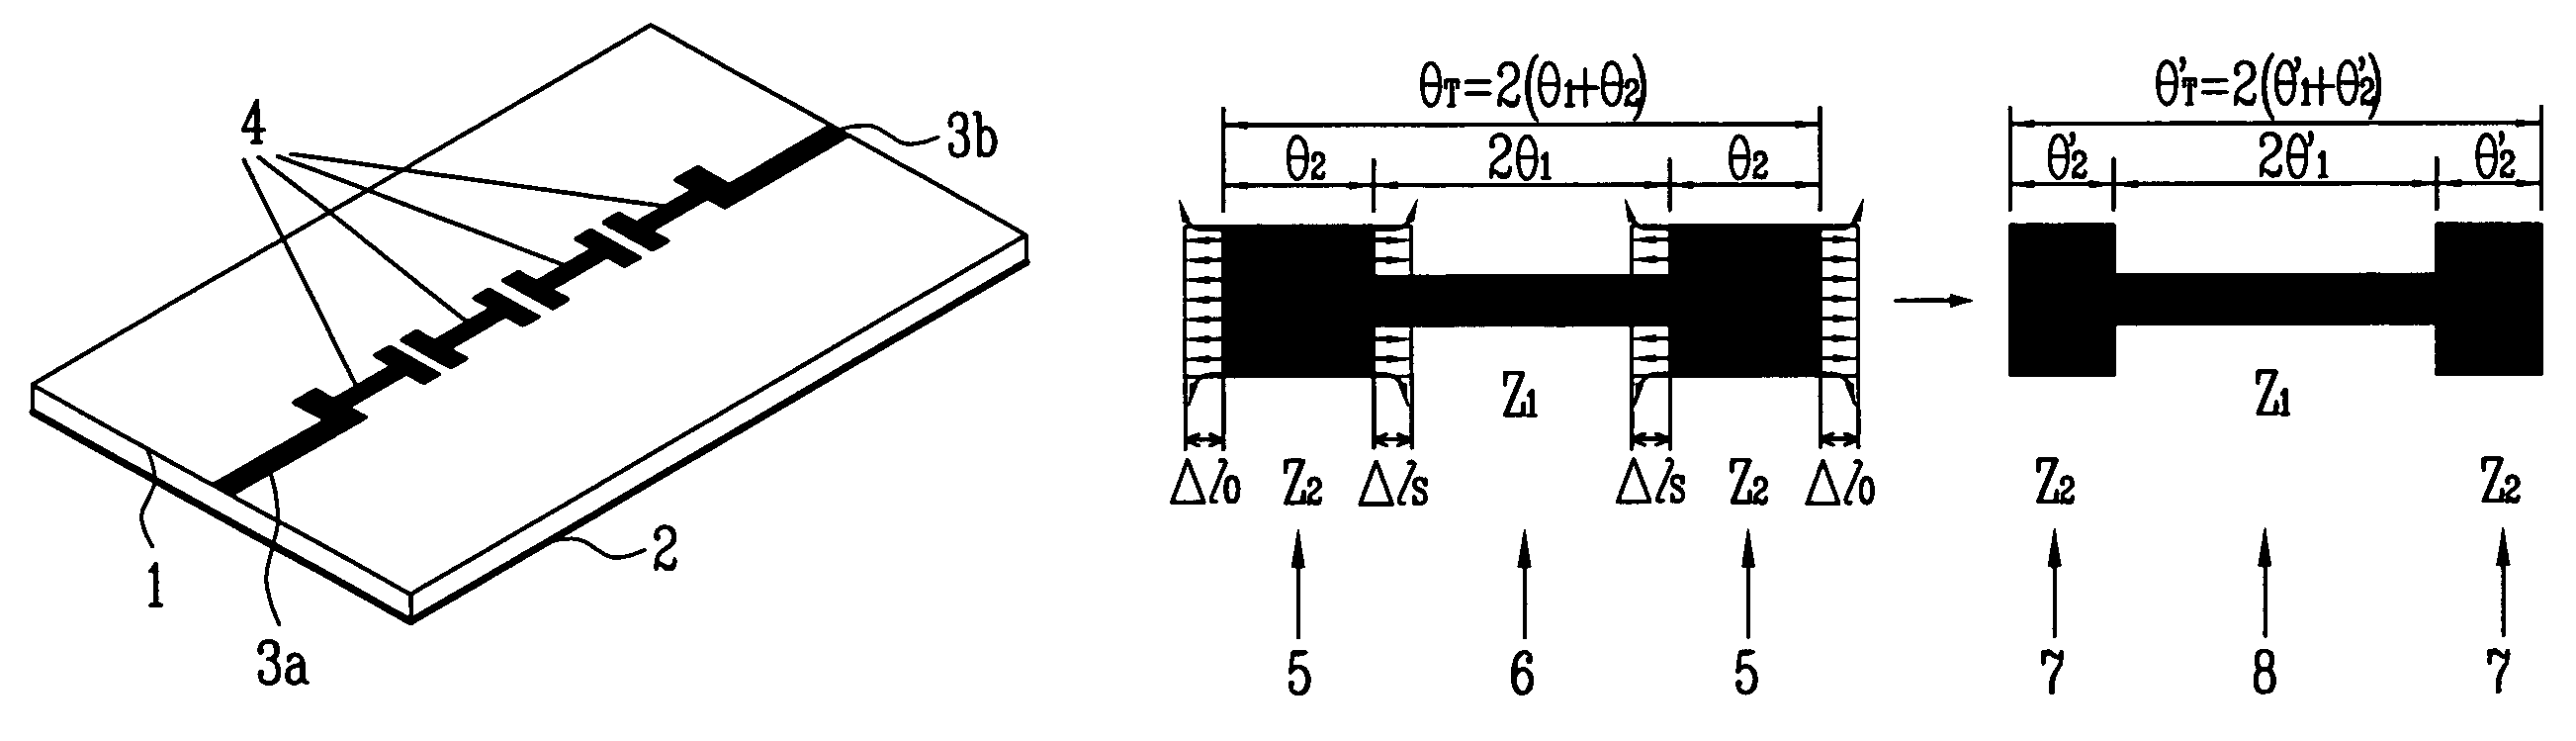 Microstrip band pass filter using end-coupled SIRs